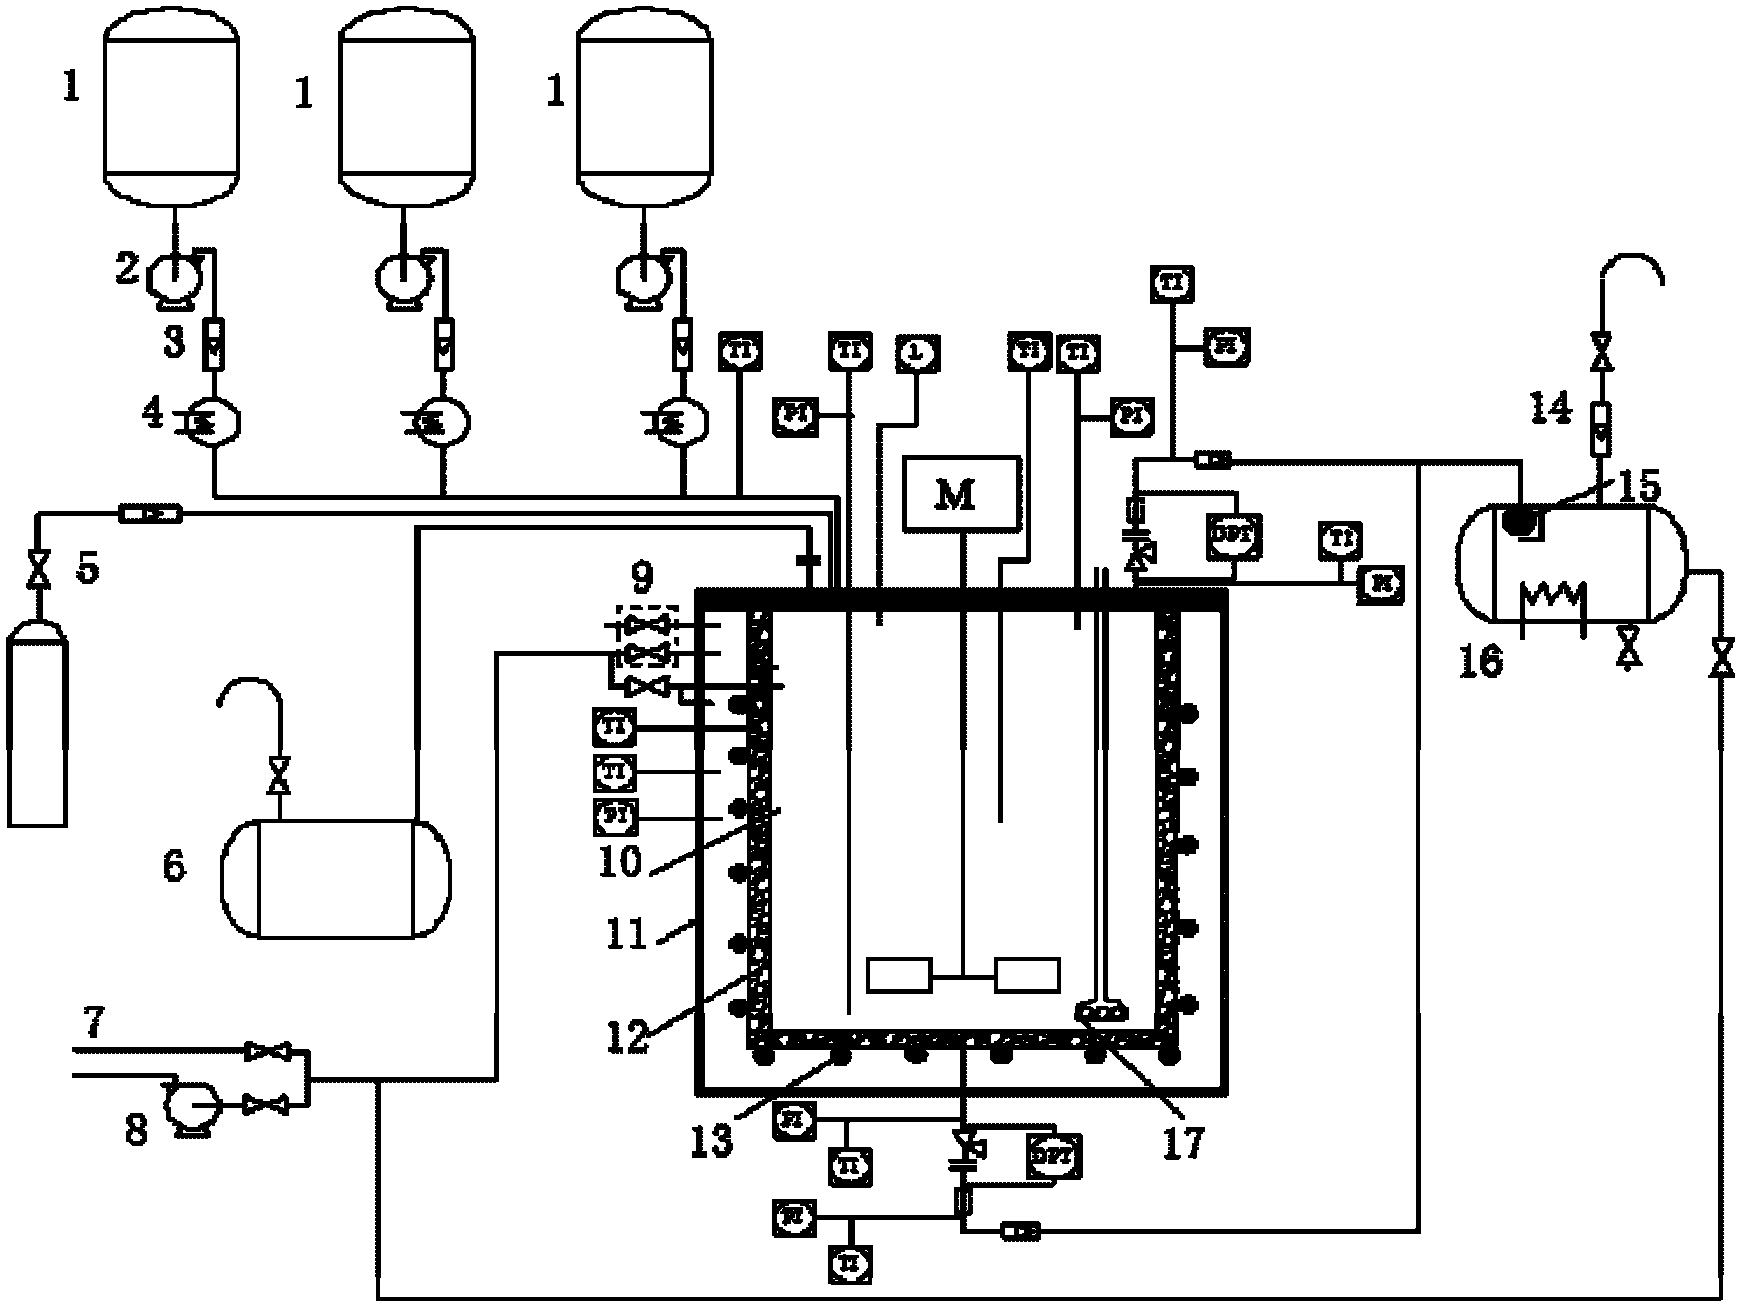 Simulation experiment device in petrochemical apparatus during emergent relief process